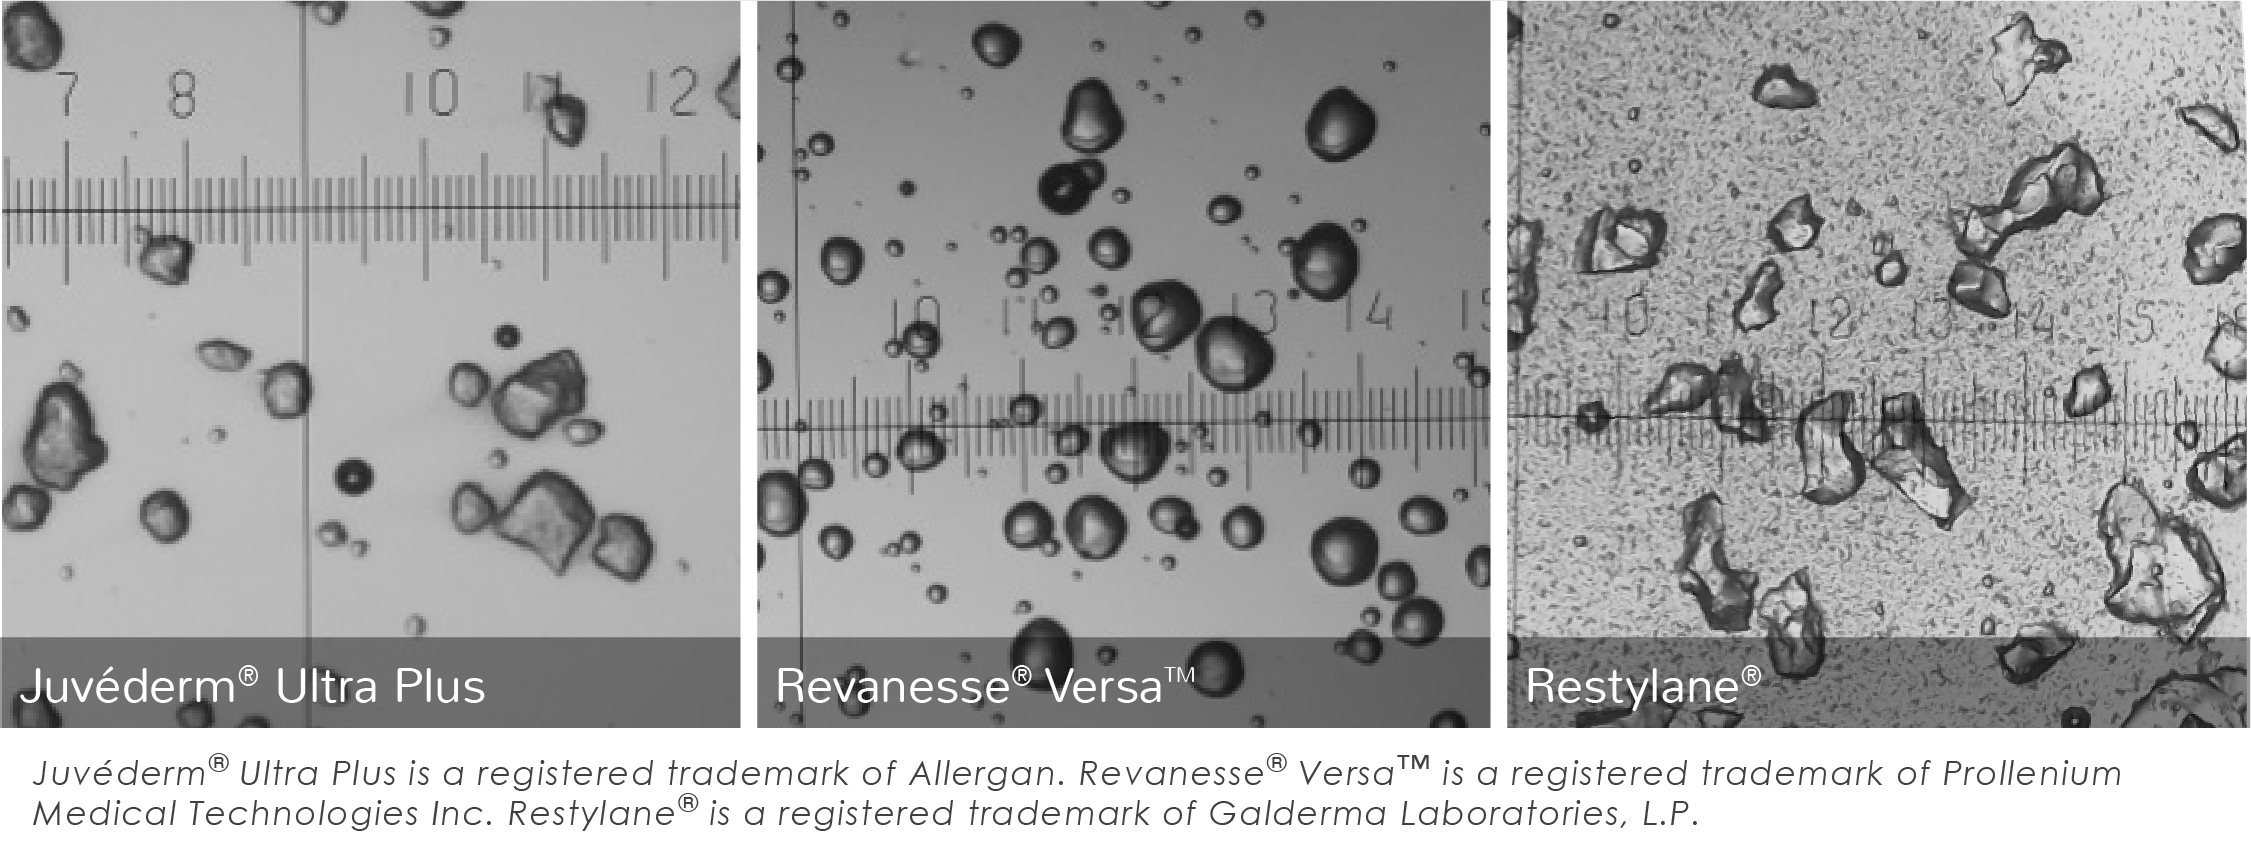 comparison of dermal fillers with Versa clearly showing more spherical particles.